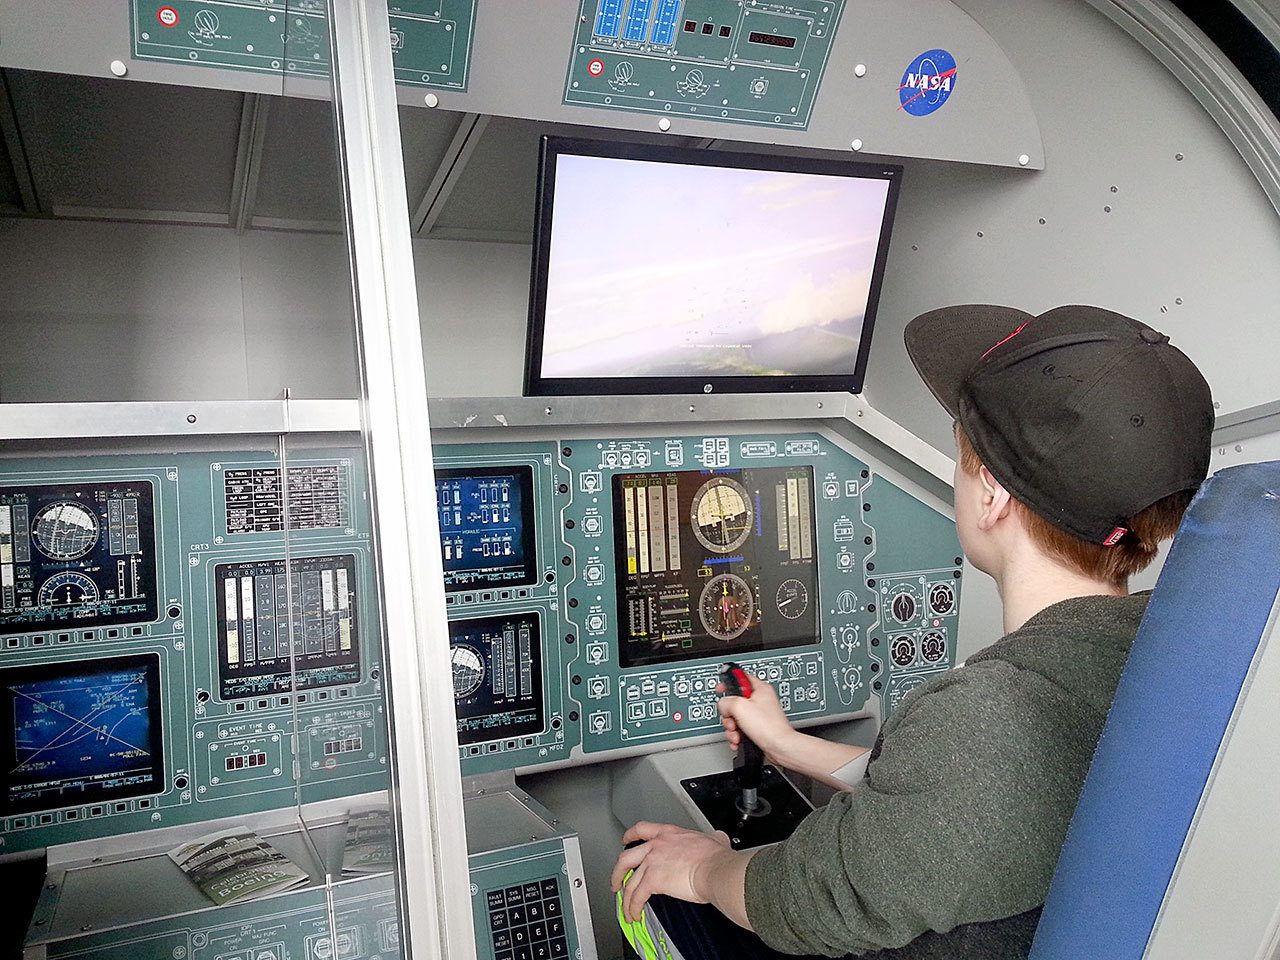 Cyras Mills, then a Hamilton sixth-grader, during a 2015 trip funded by the Port Angeles Education Foundation to the Museum of Flight in Seattle. Cyras is now a seventh-grade student at Stevens Middle School. (Port Angeles School District)